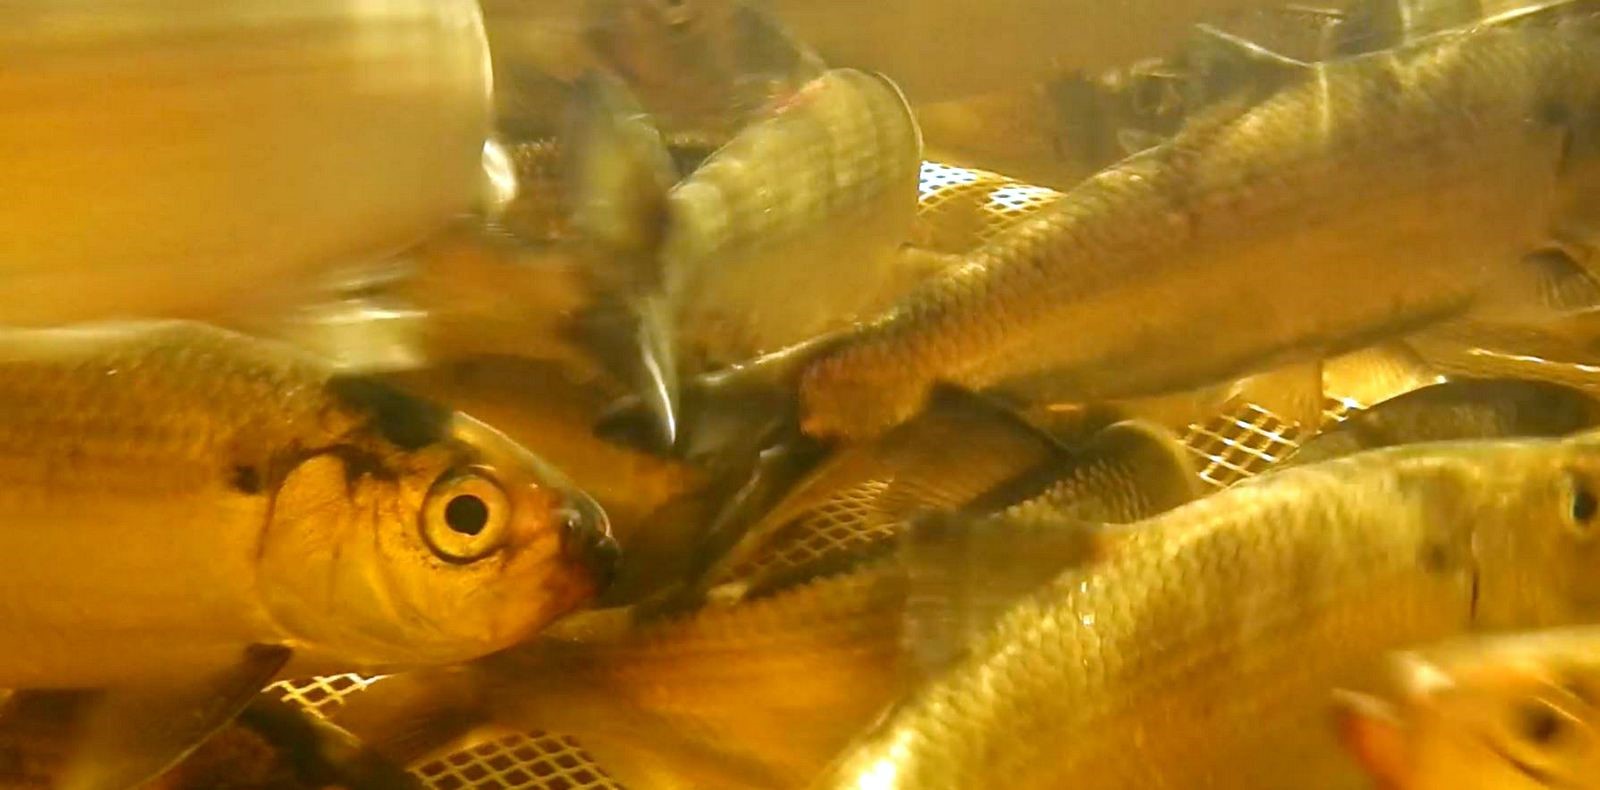 Alewives swim in a trap before they’re released back into the St. Croix. Credit: Atlantic Salmon Federation.